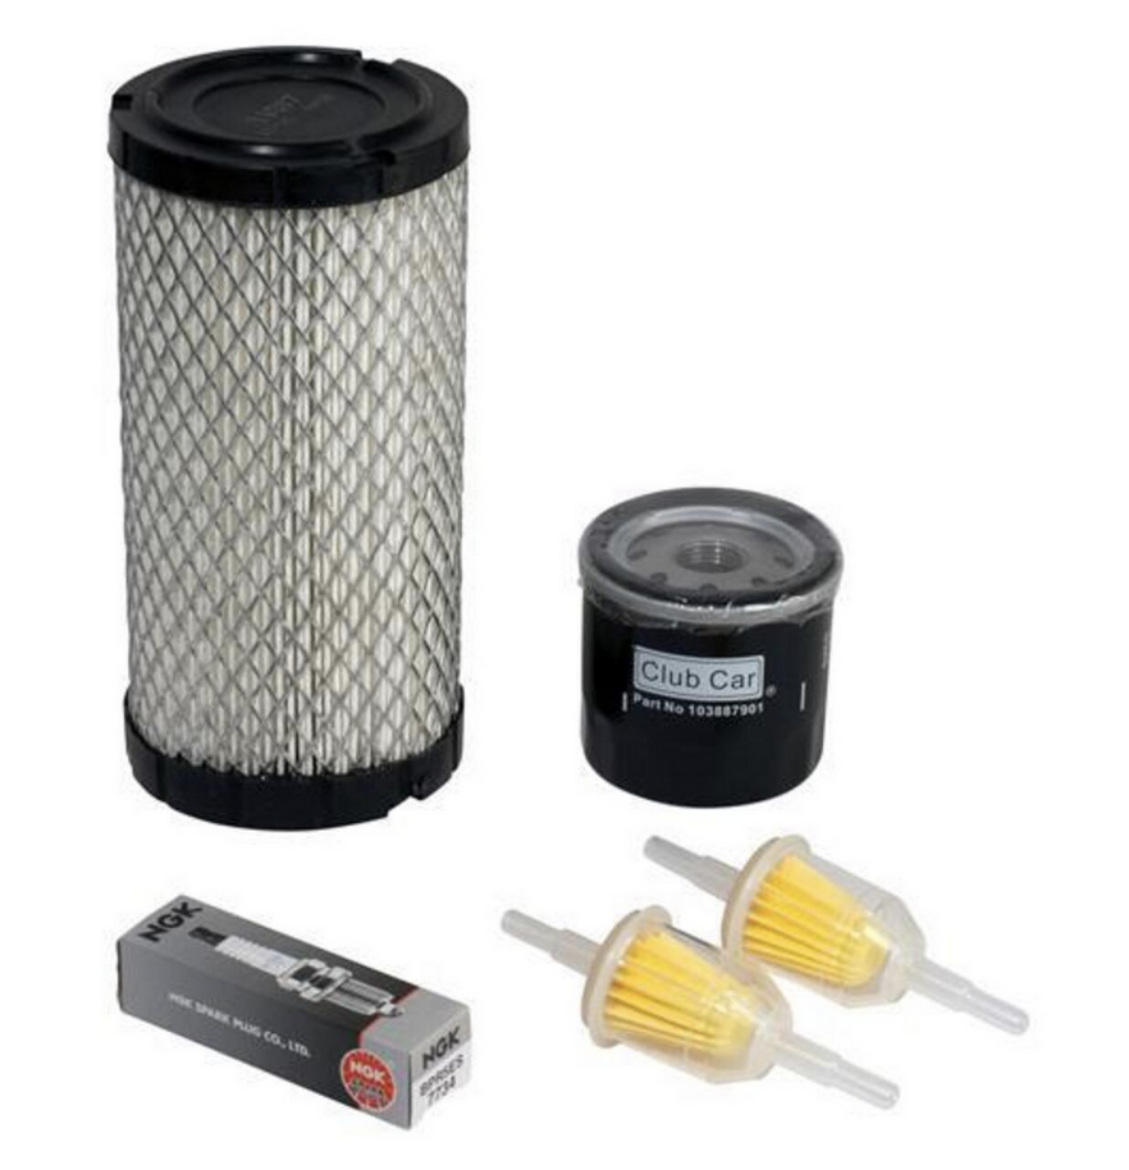 Picture of CCAR PREC TUNE UP KIT 04-15 (2) FUEL FILTERS, AIR, OIL FILTER, SPARK PLUG